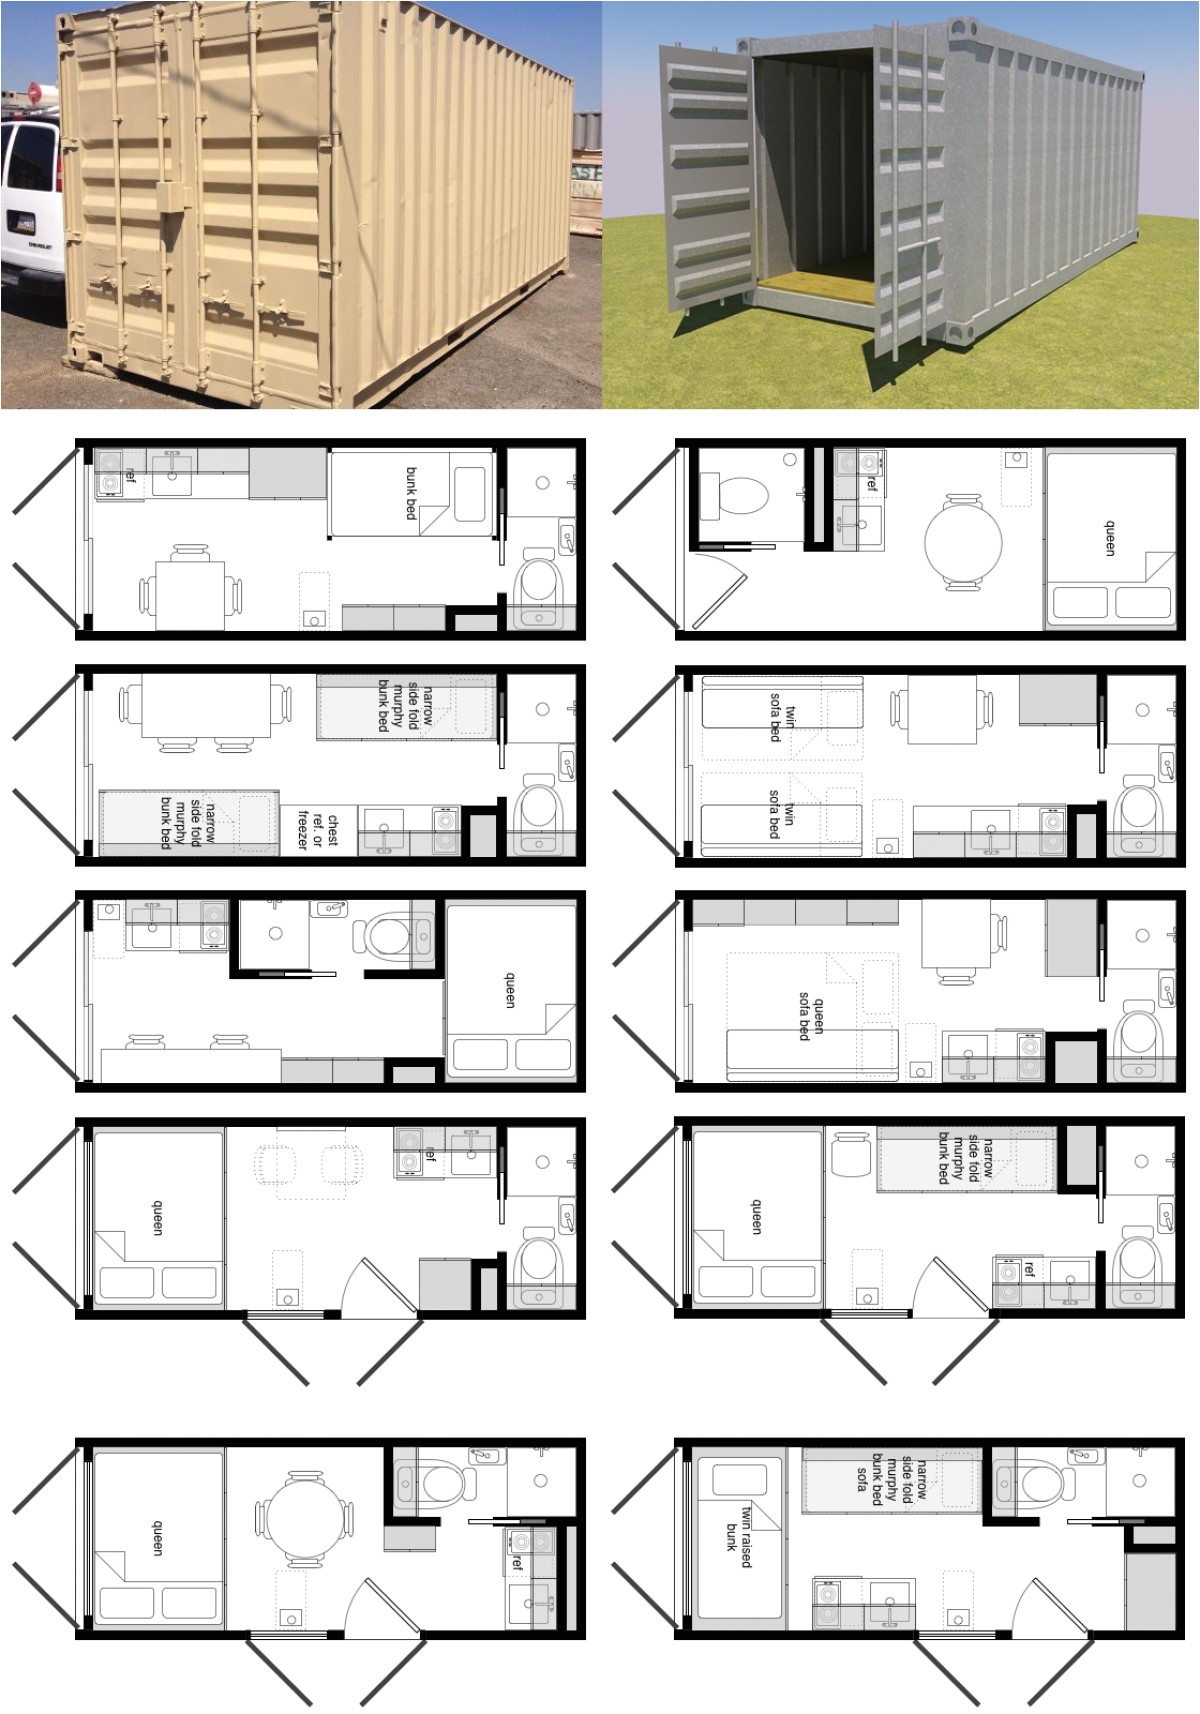 Container Home Plans Designs Shipping Container Home Designs and Plans Container